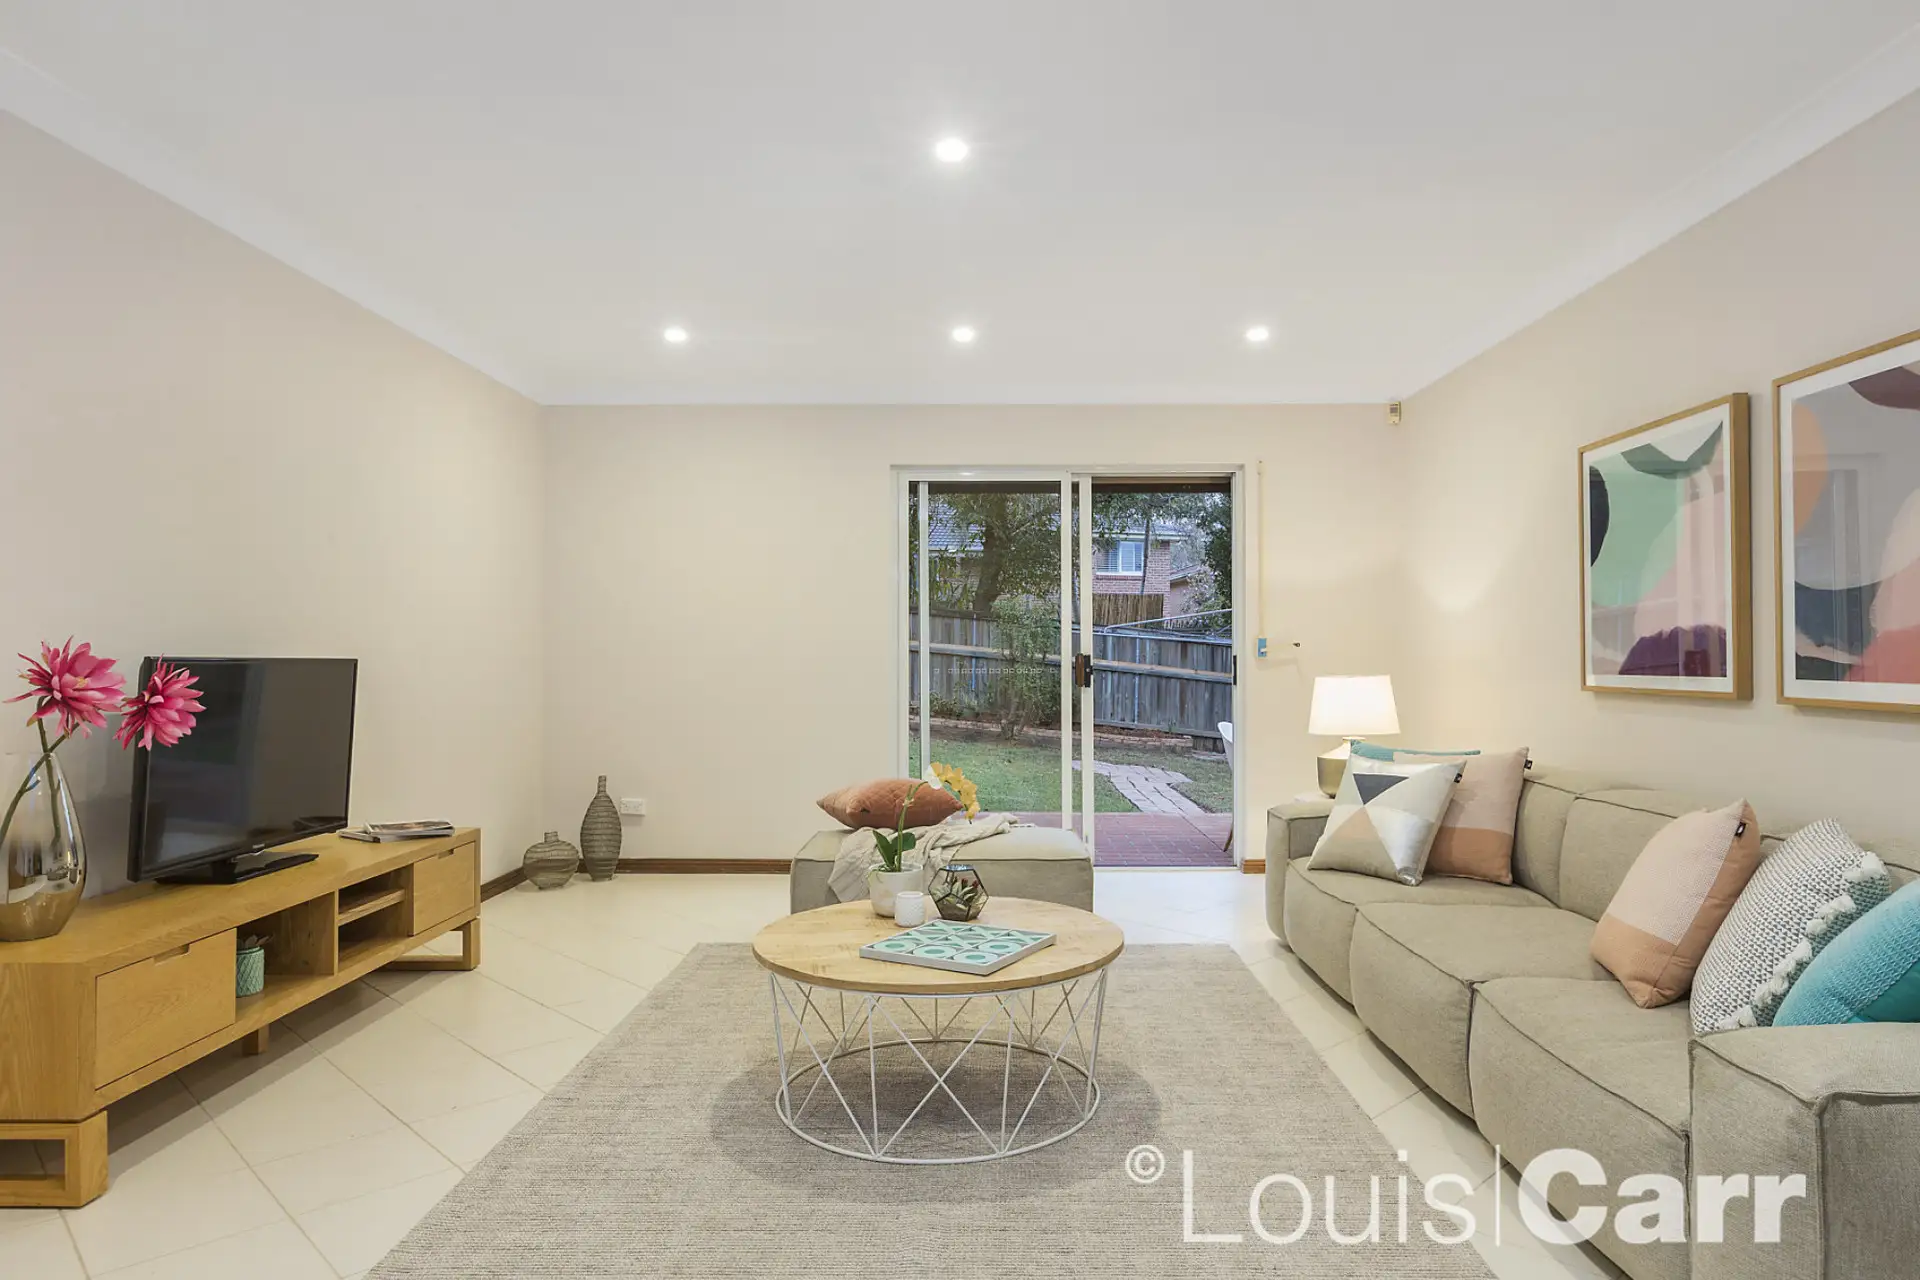 Photo #5: 20 Hibiscus Place, Cherrybrook - Sold by Louis Carr Real Estate